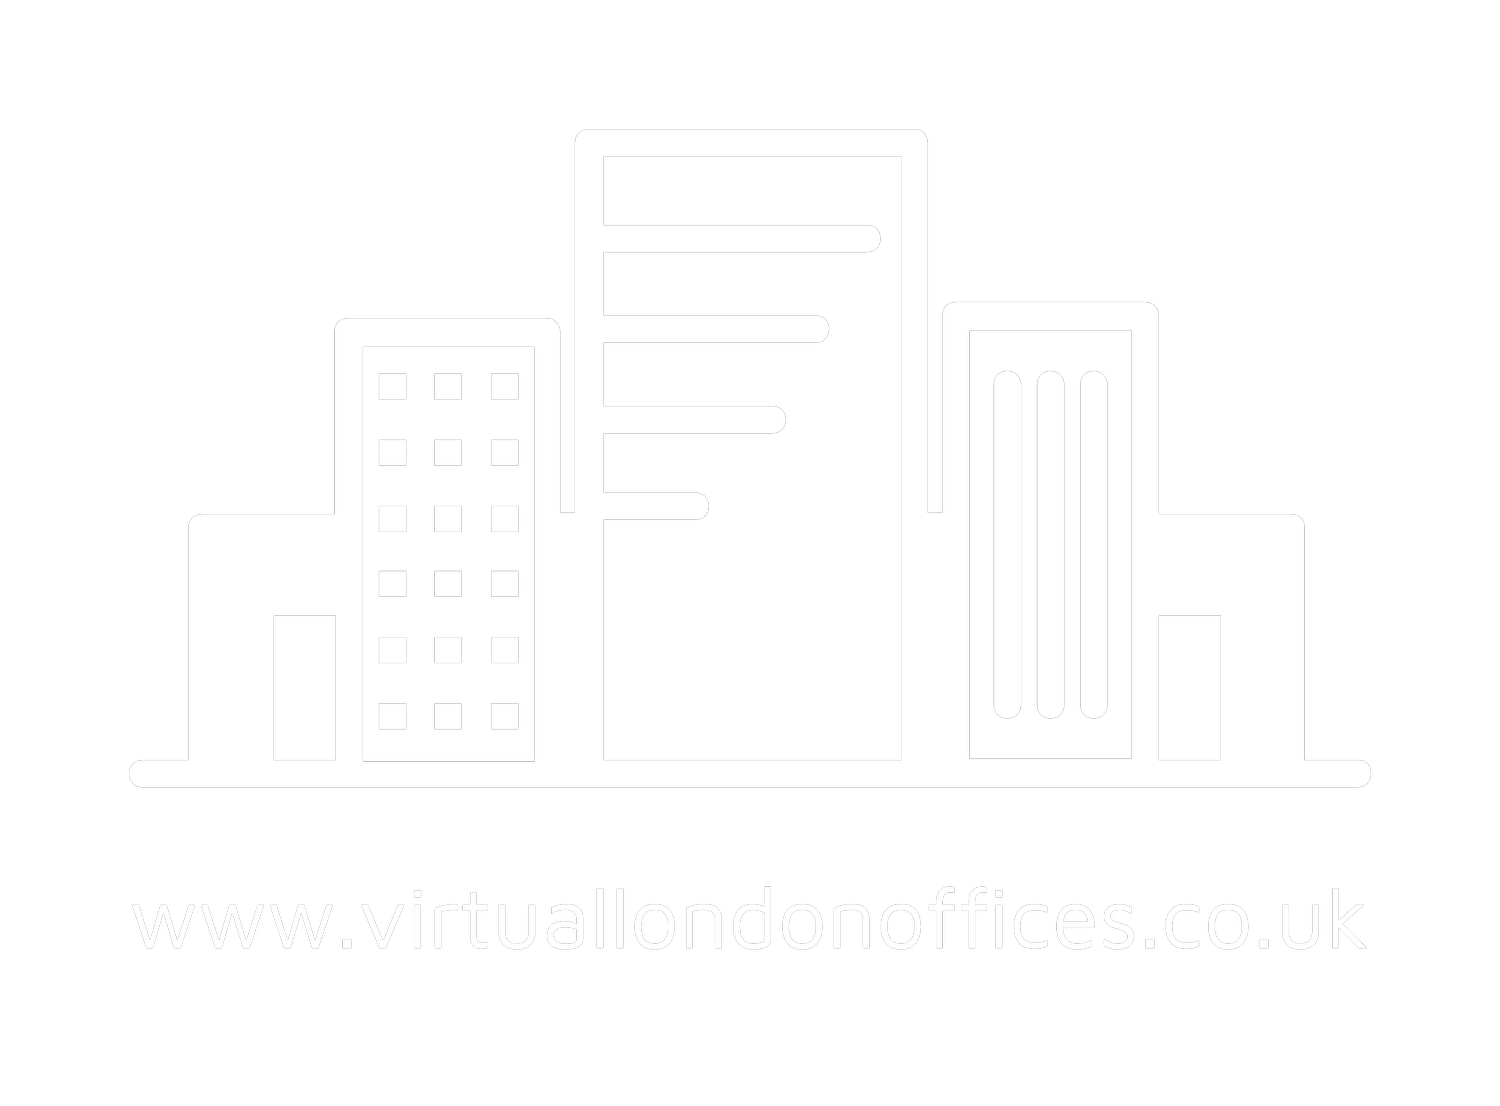 Virtual London Offices